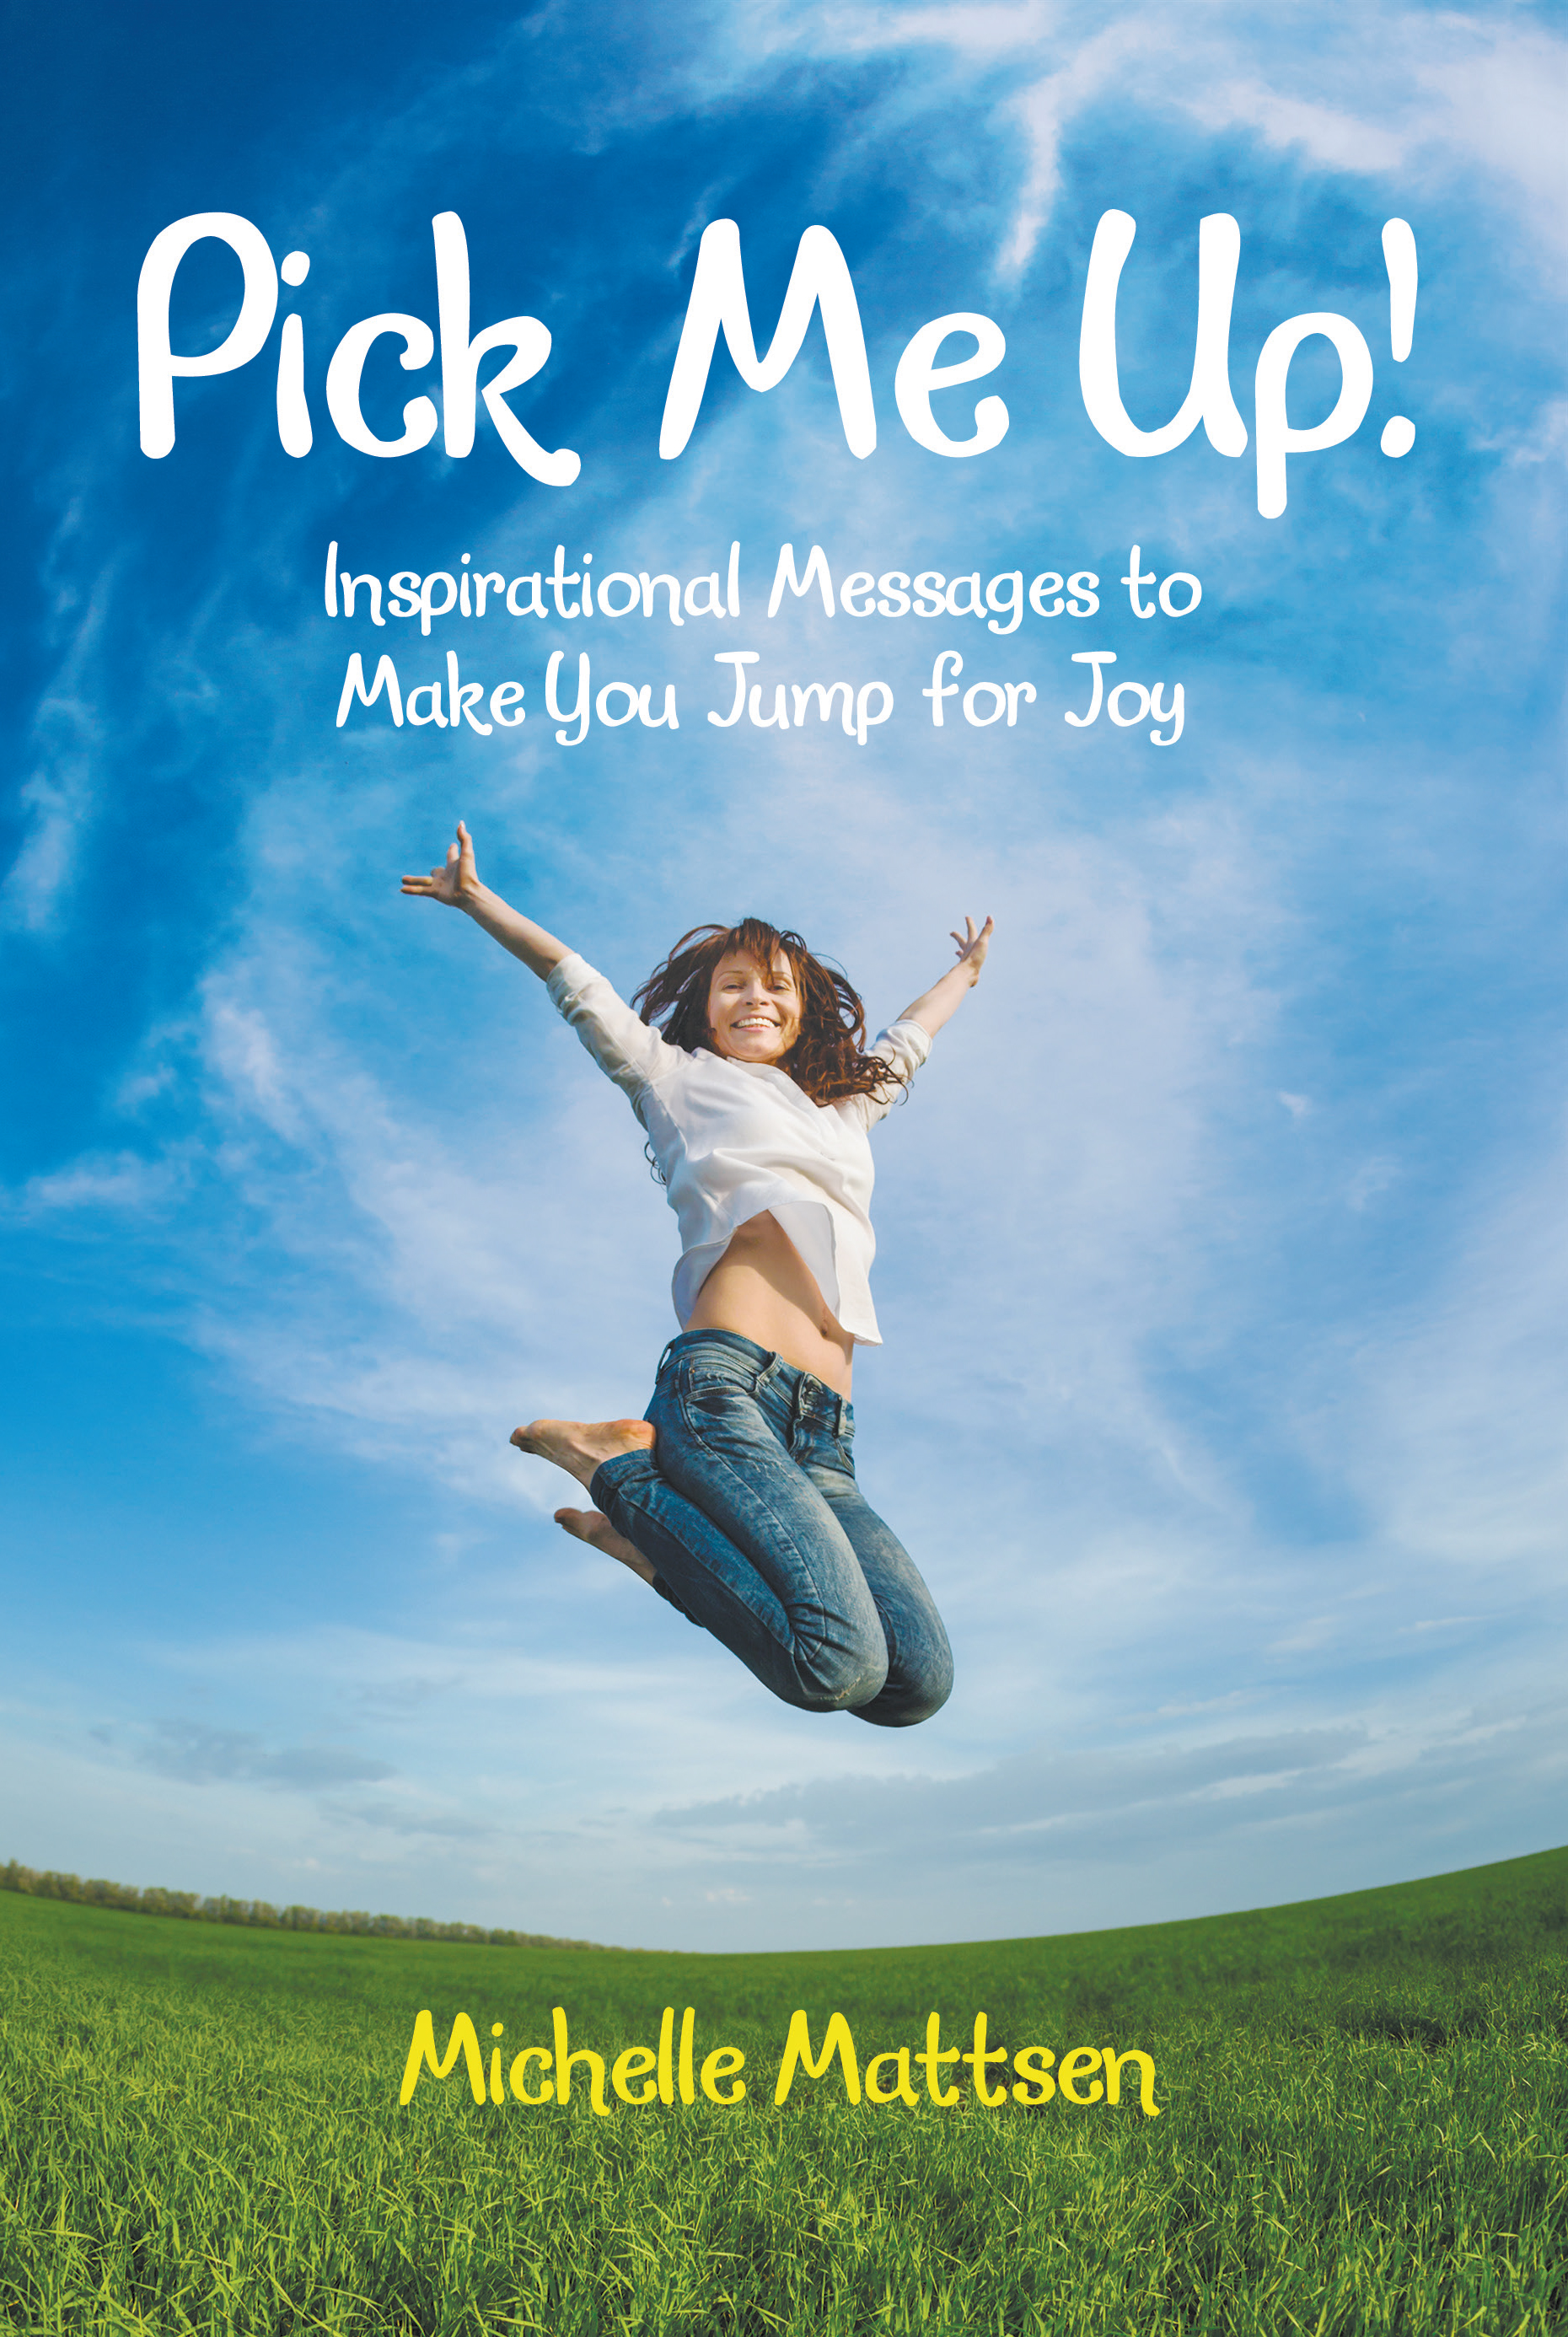 make the jump quotes